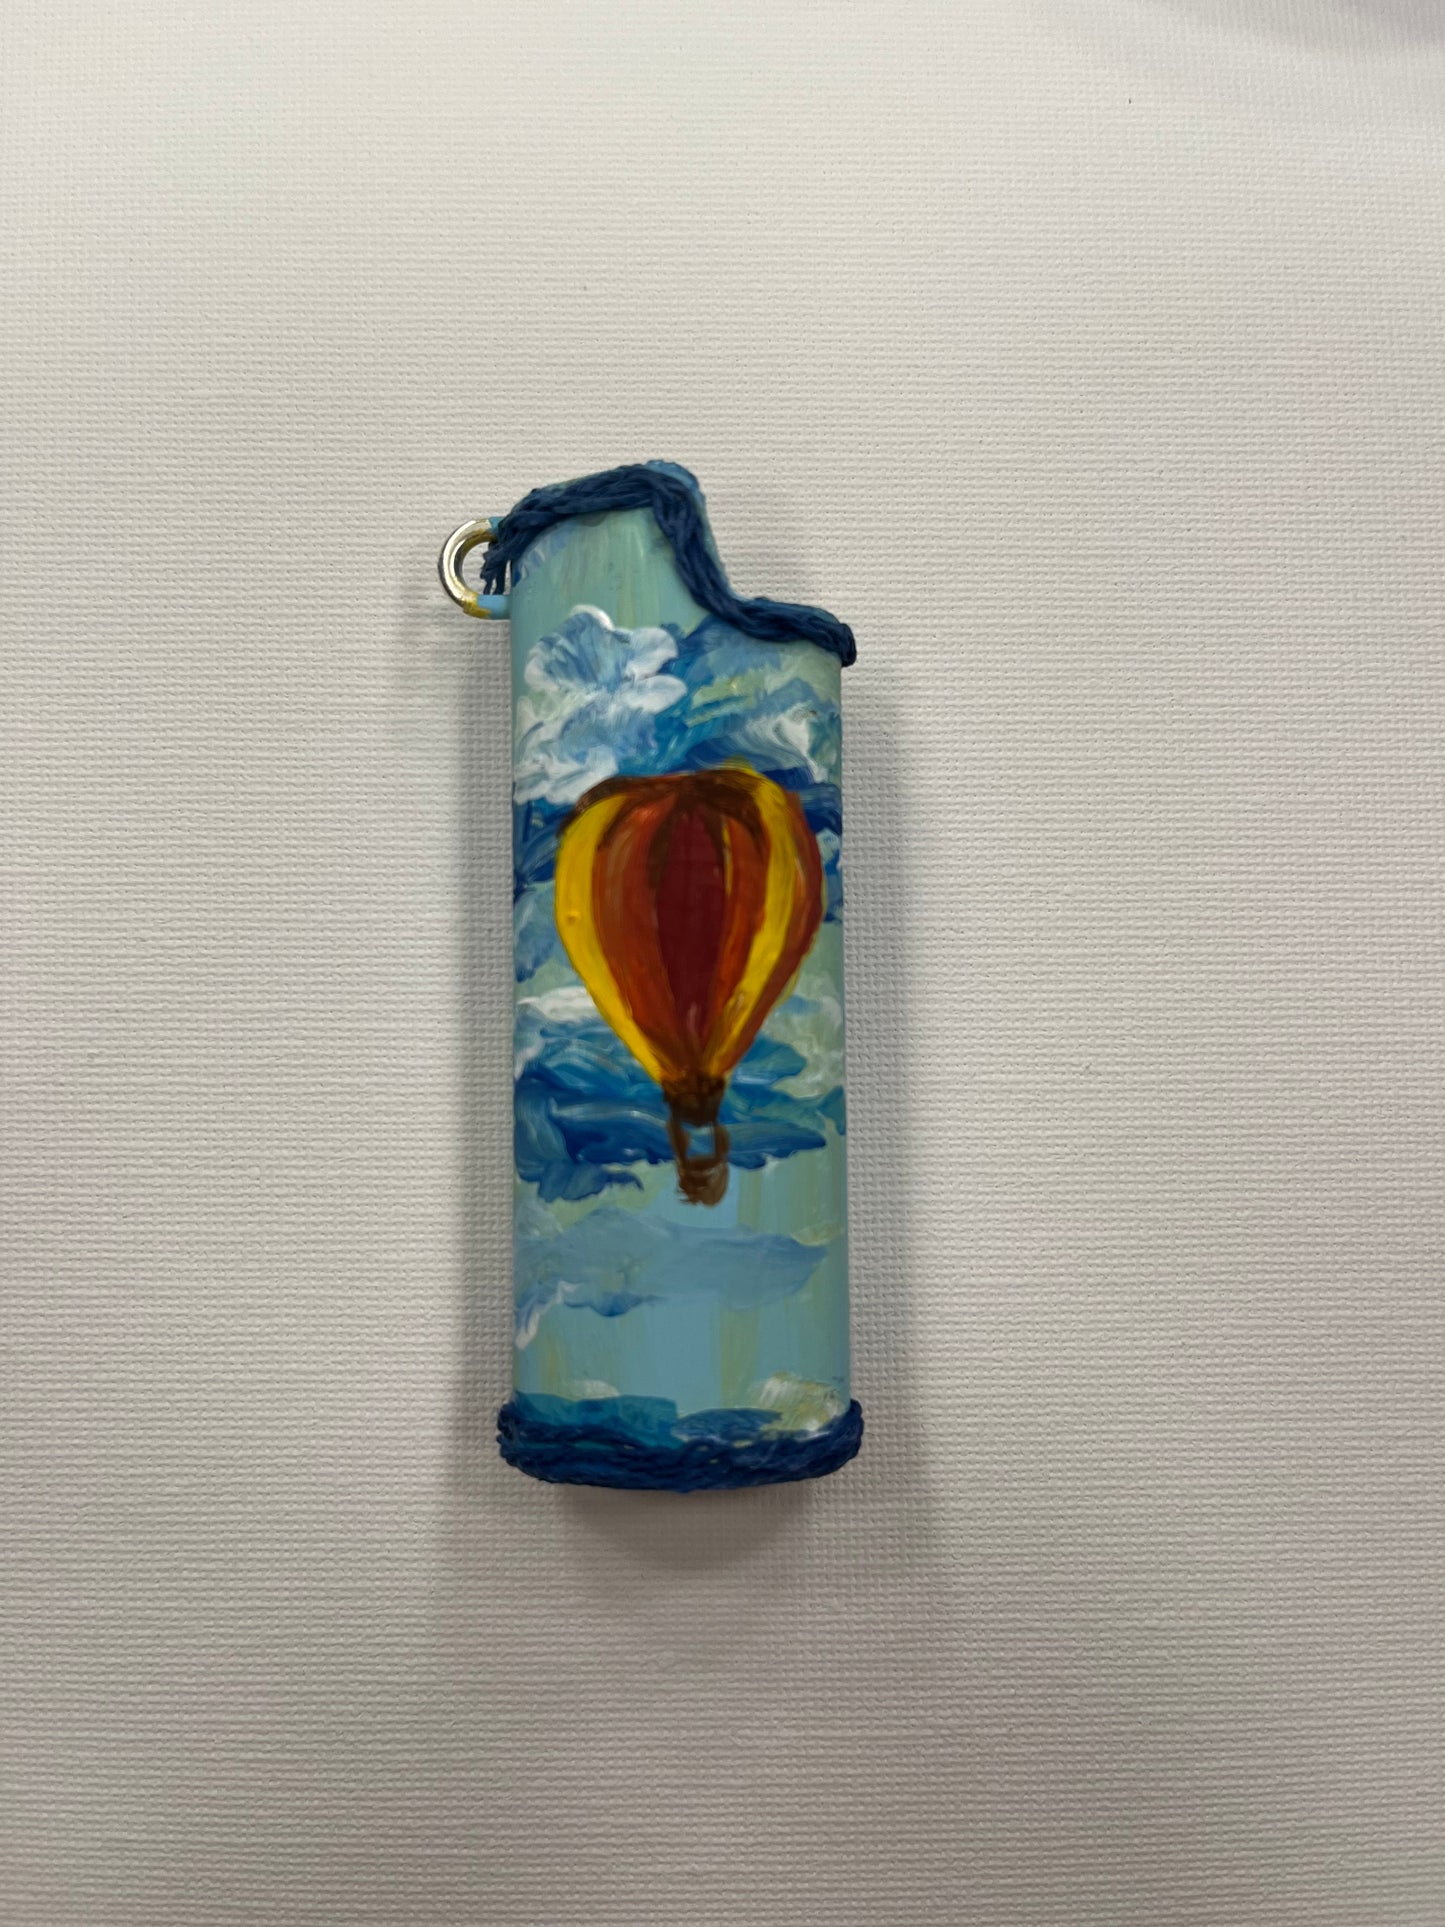 LIGHTER COVER: Original Hand-painted Lighter Cover